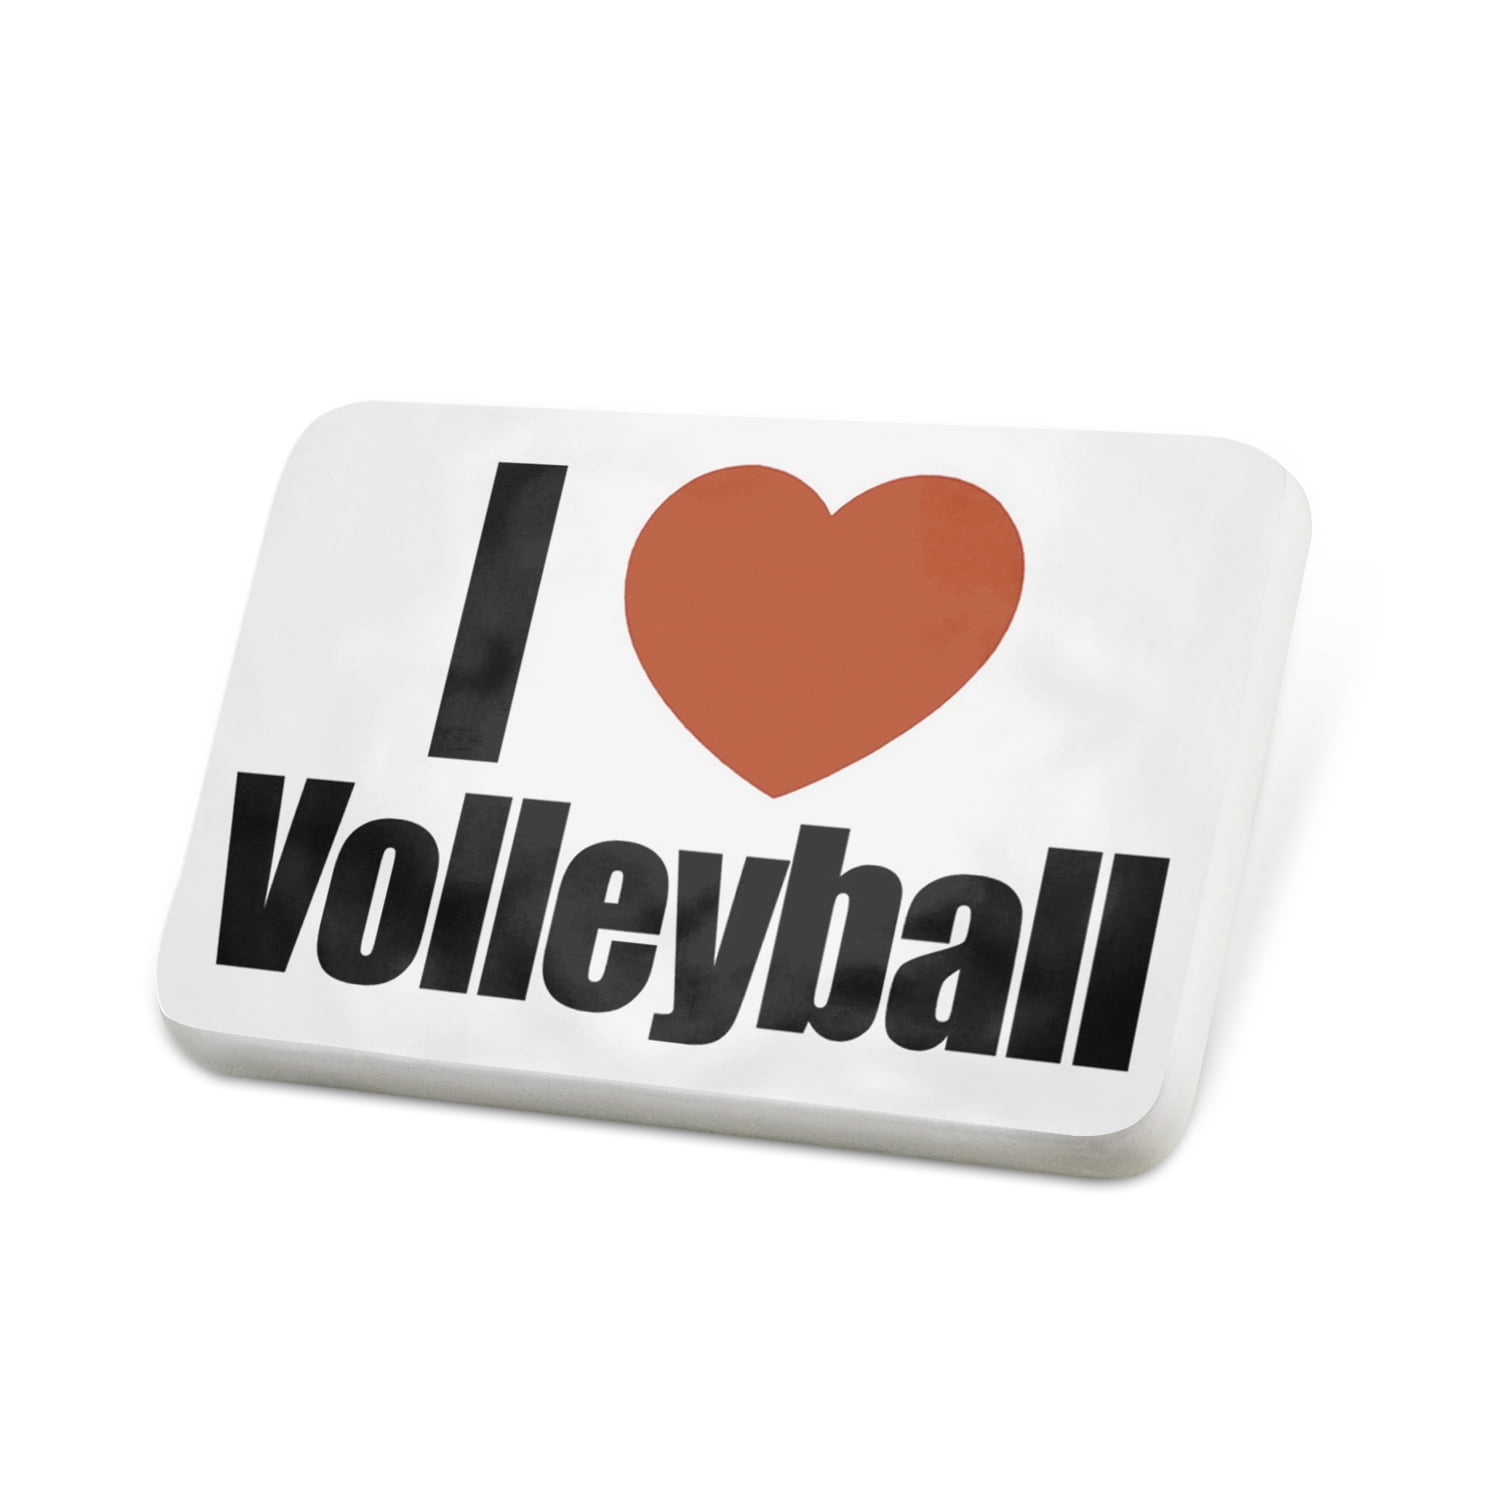 I LOVE HEART VOLLEYBALL VOLLEY BALL NOVELTY PIN BADGE 3/4 INCH 